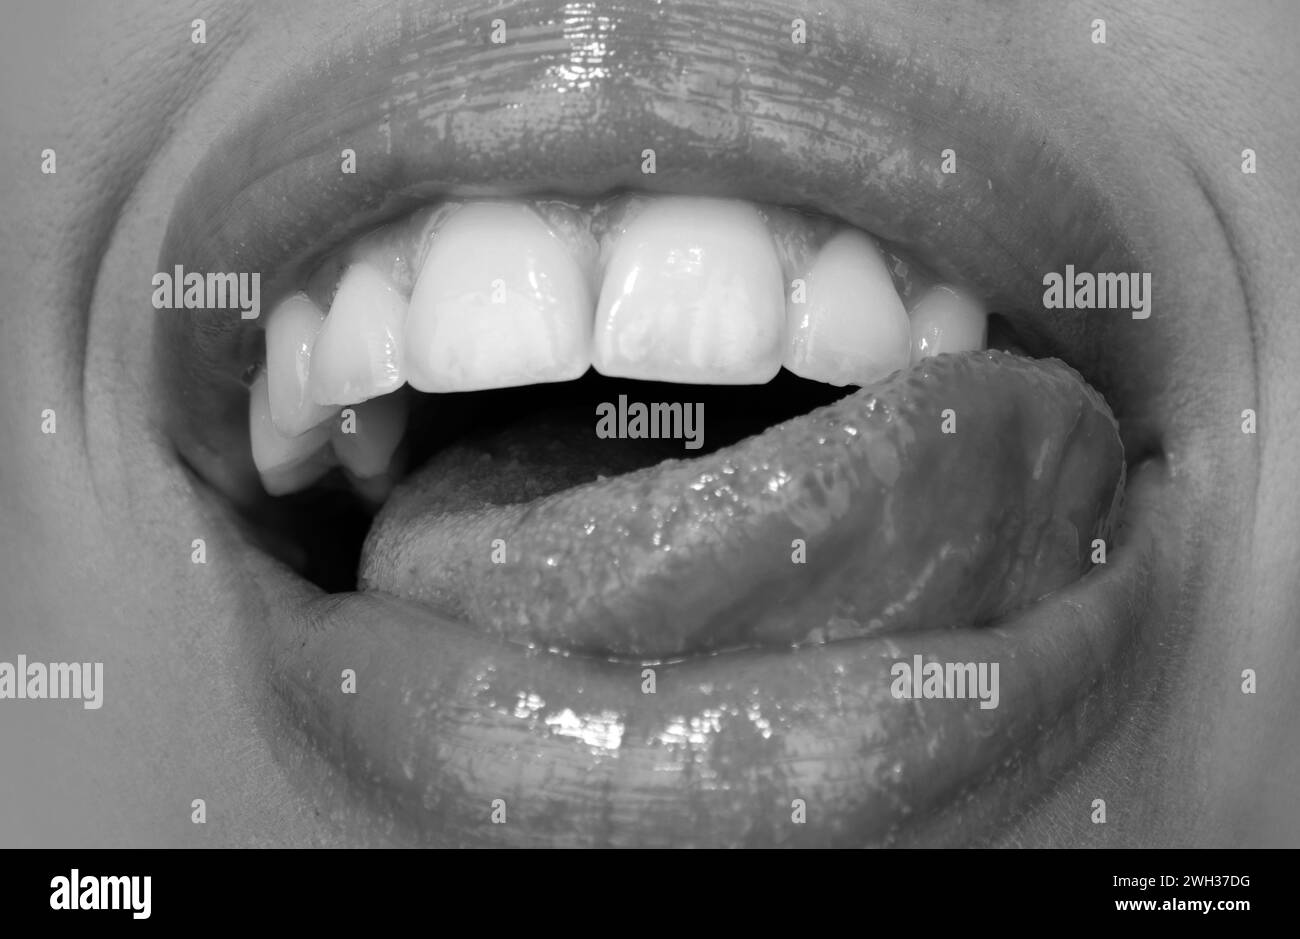 Dental care, healthy teeth and smile, white teeth in mouth. Closeup of smile with white healthy teeth. Open mouth, tongue touches the teeth. Stock Photo